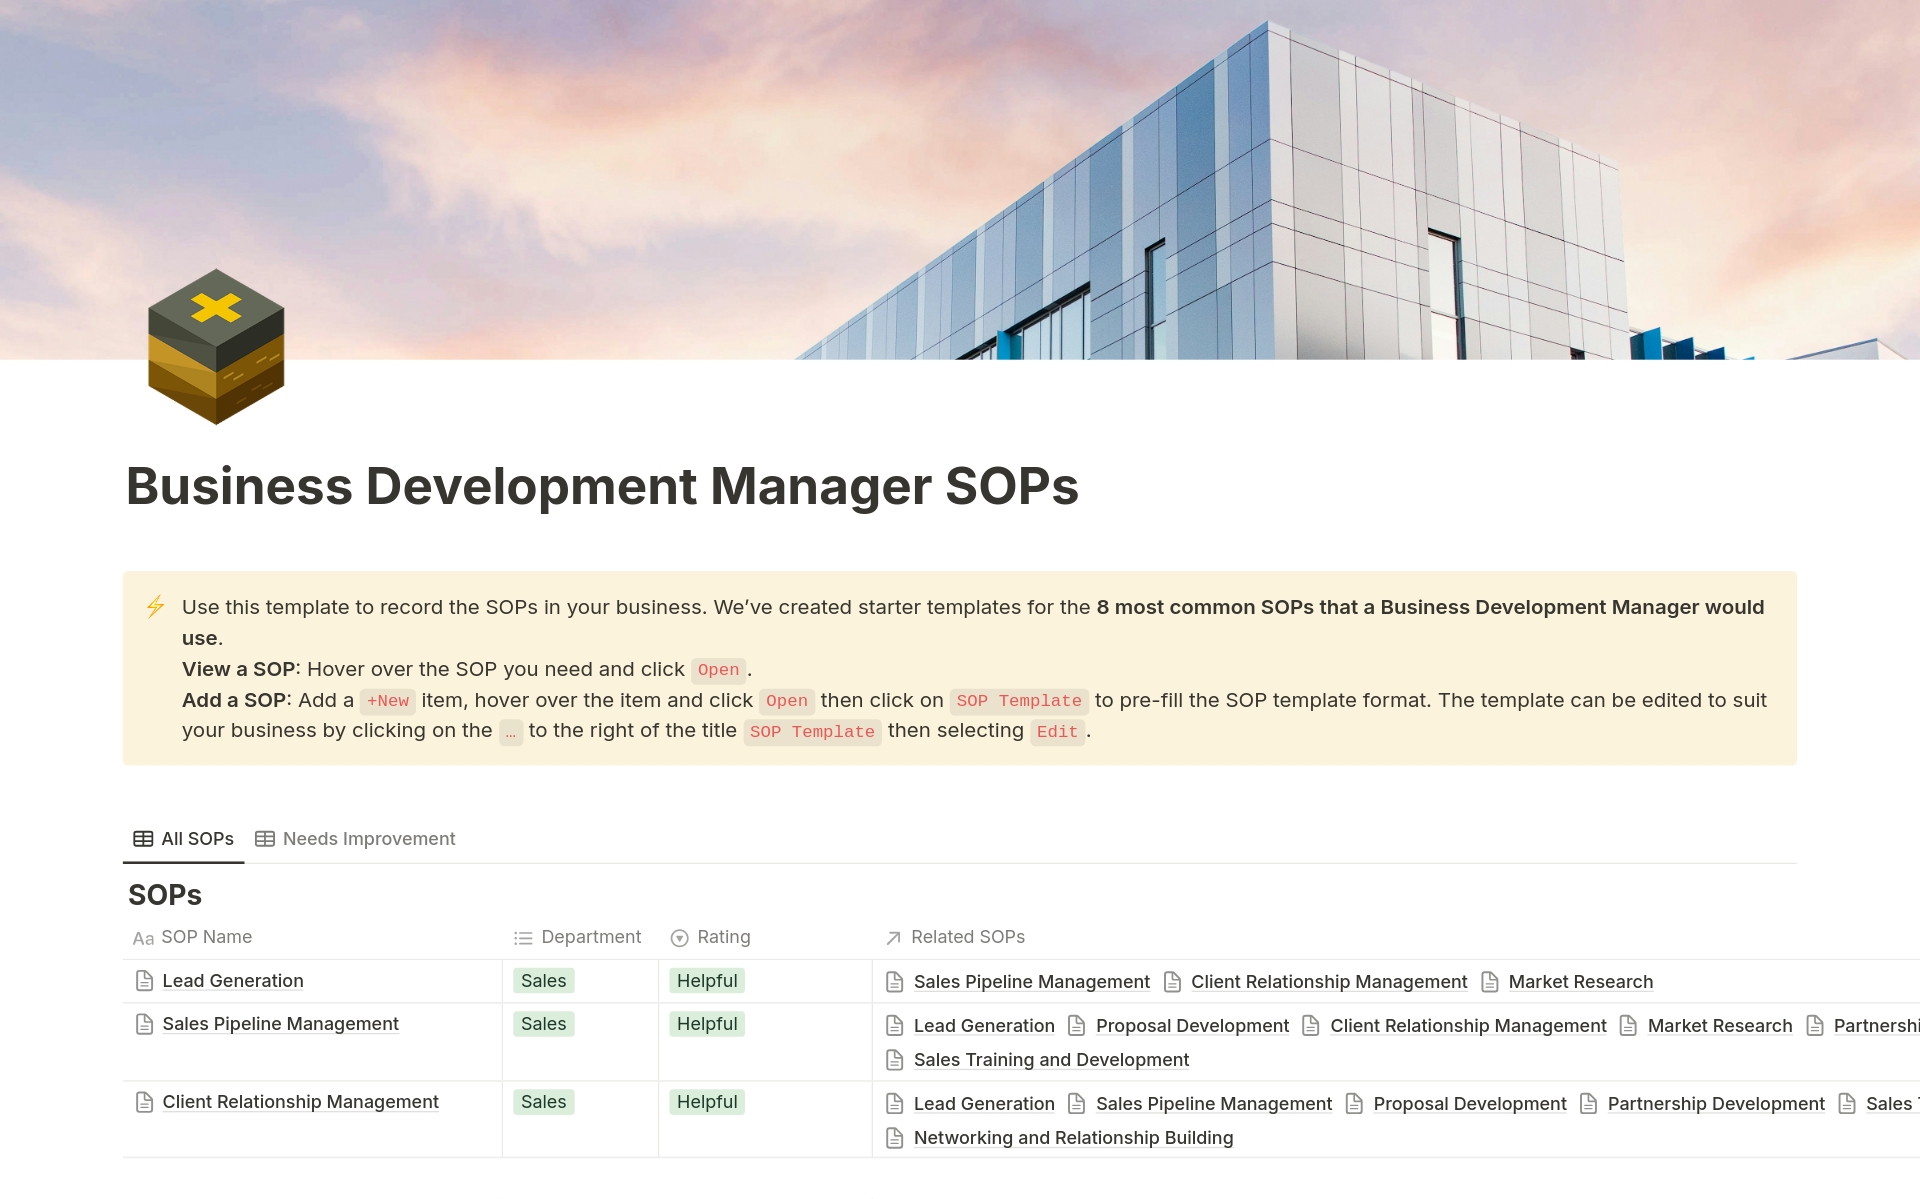 This template outlines Standard Operating Procedures (SOPs) for Business Development Managers, encompassing lead generation, sales pipeline management, client relationship management & more. Save 10 hours of research.